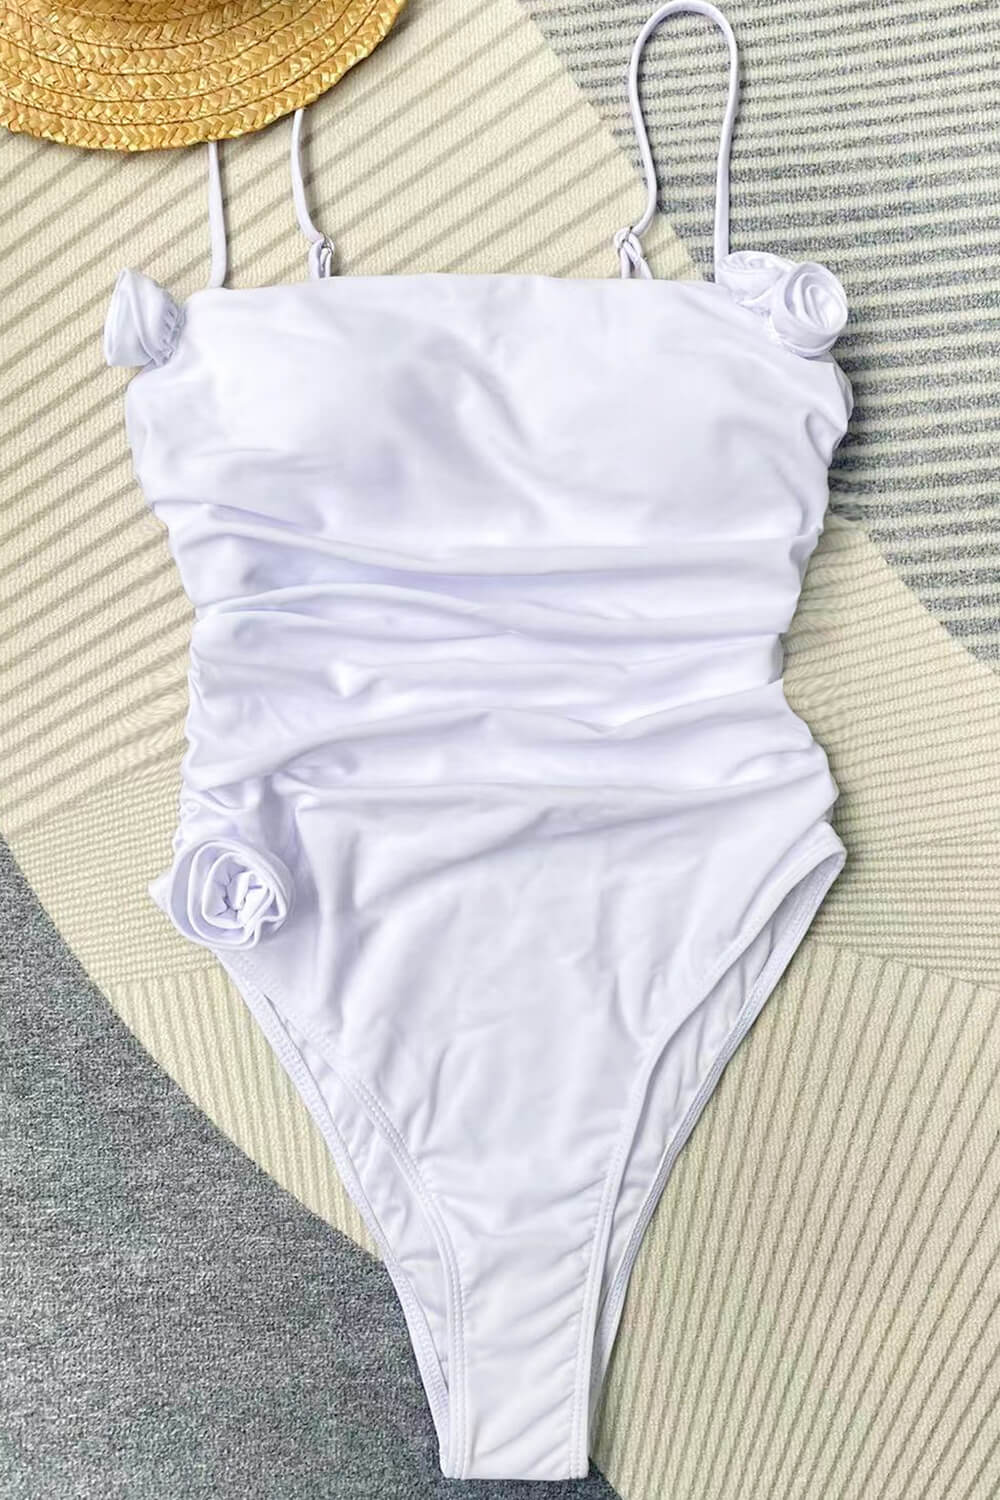 Rosette Bustier One Piece Swimsuit - White